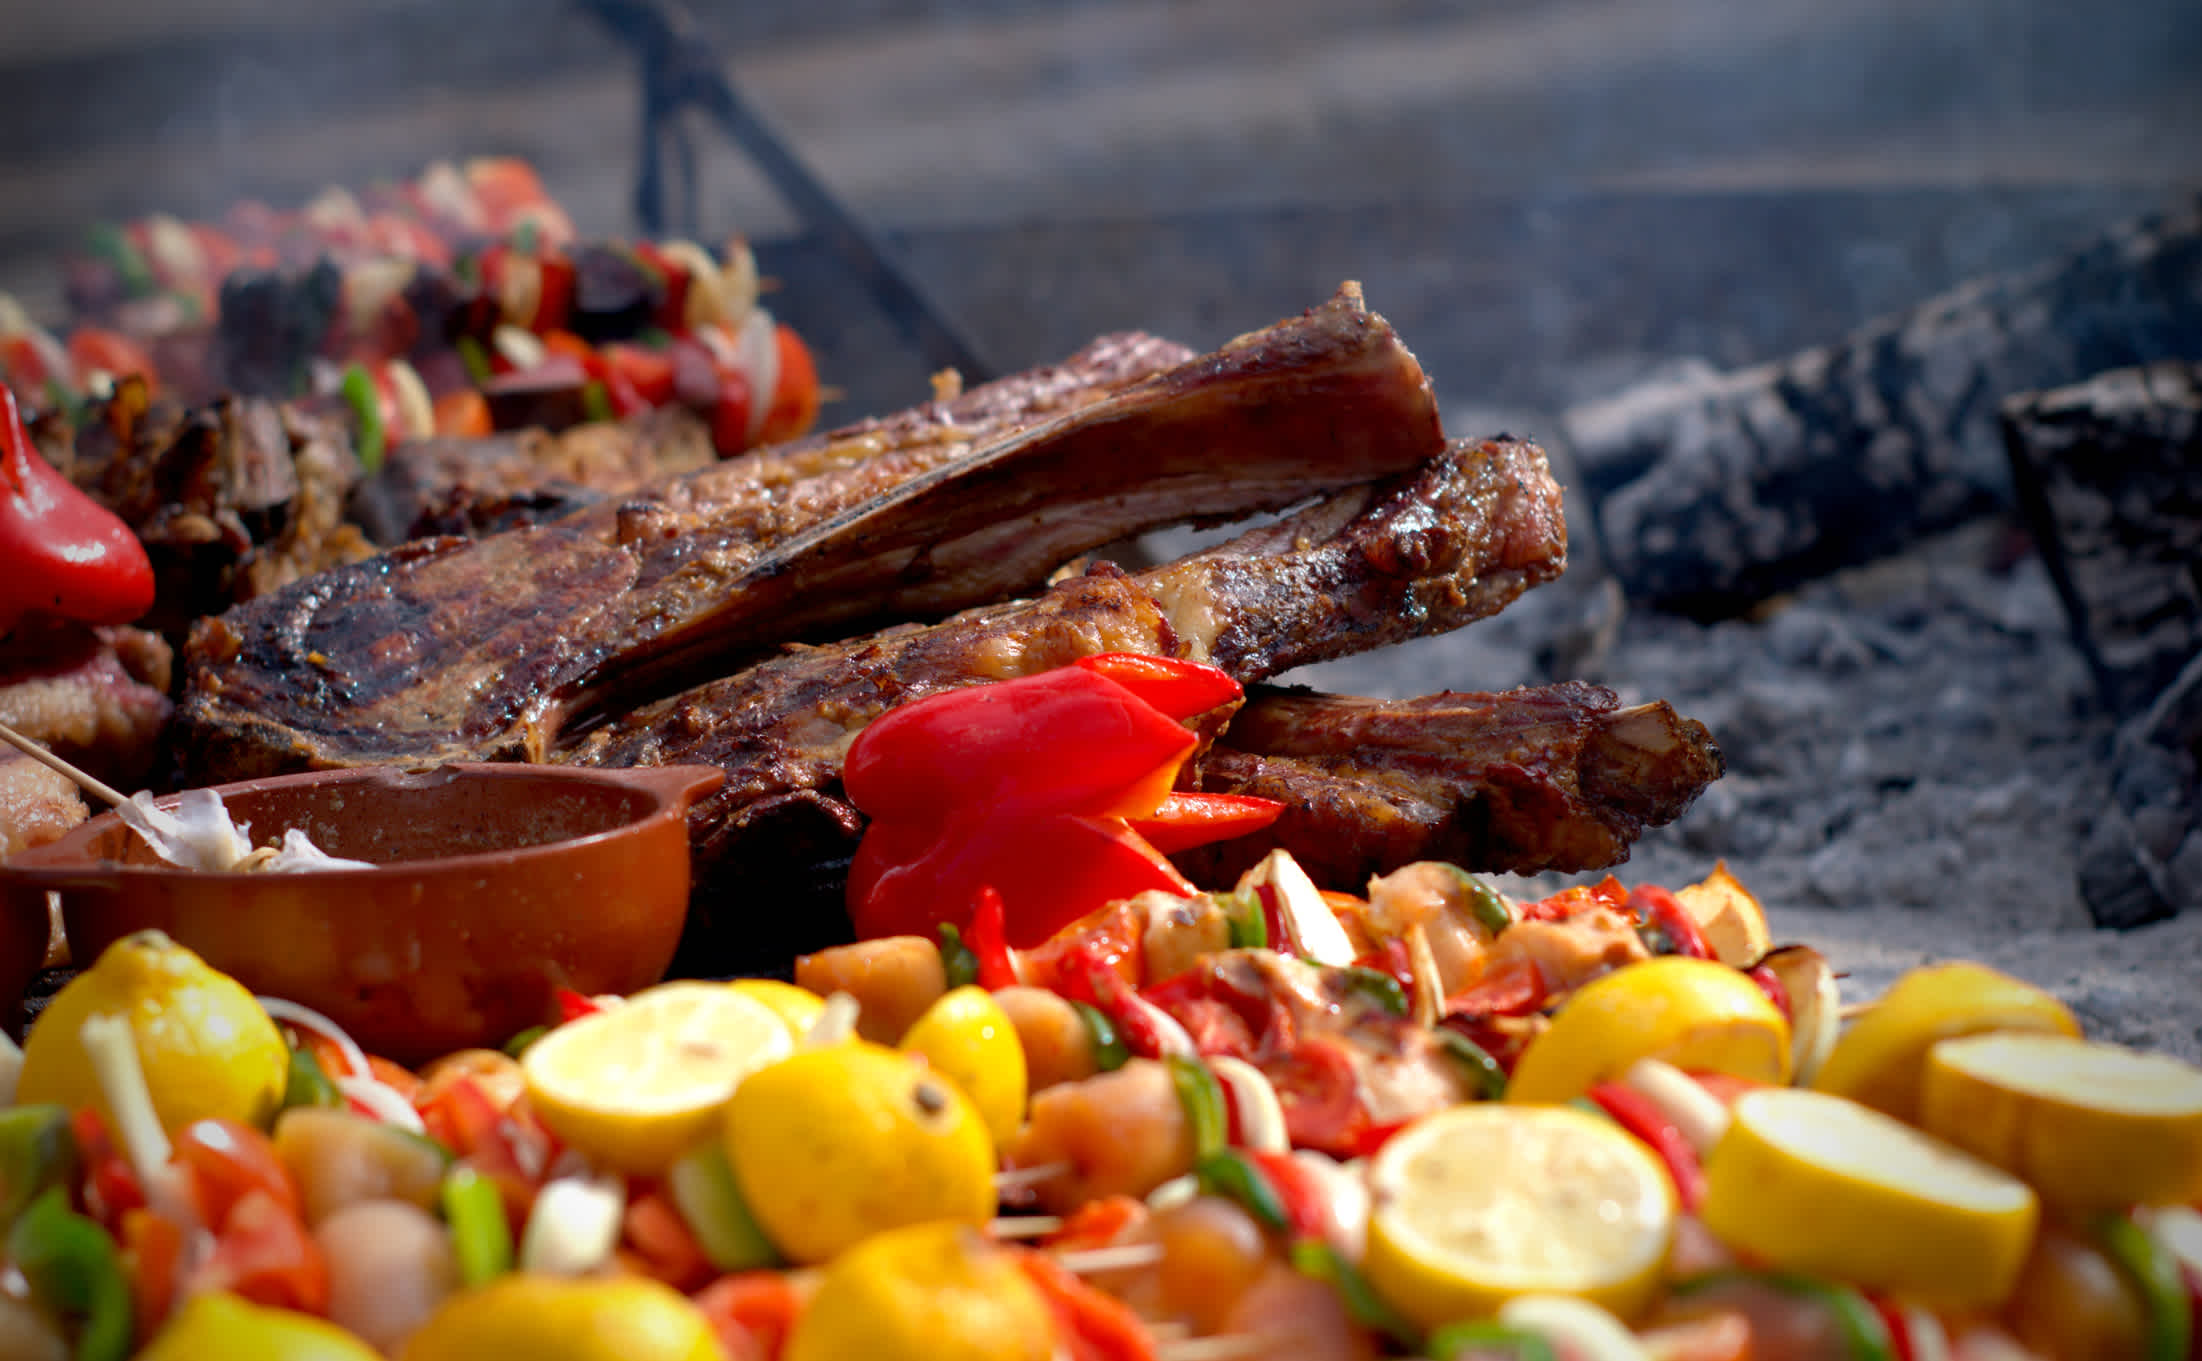 Grilled meat and vegetable skewers at a typical Argentinian asado (barbecue).
